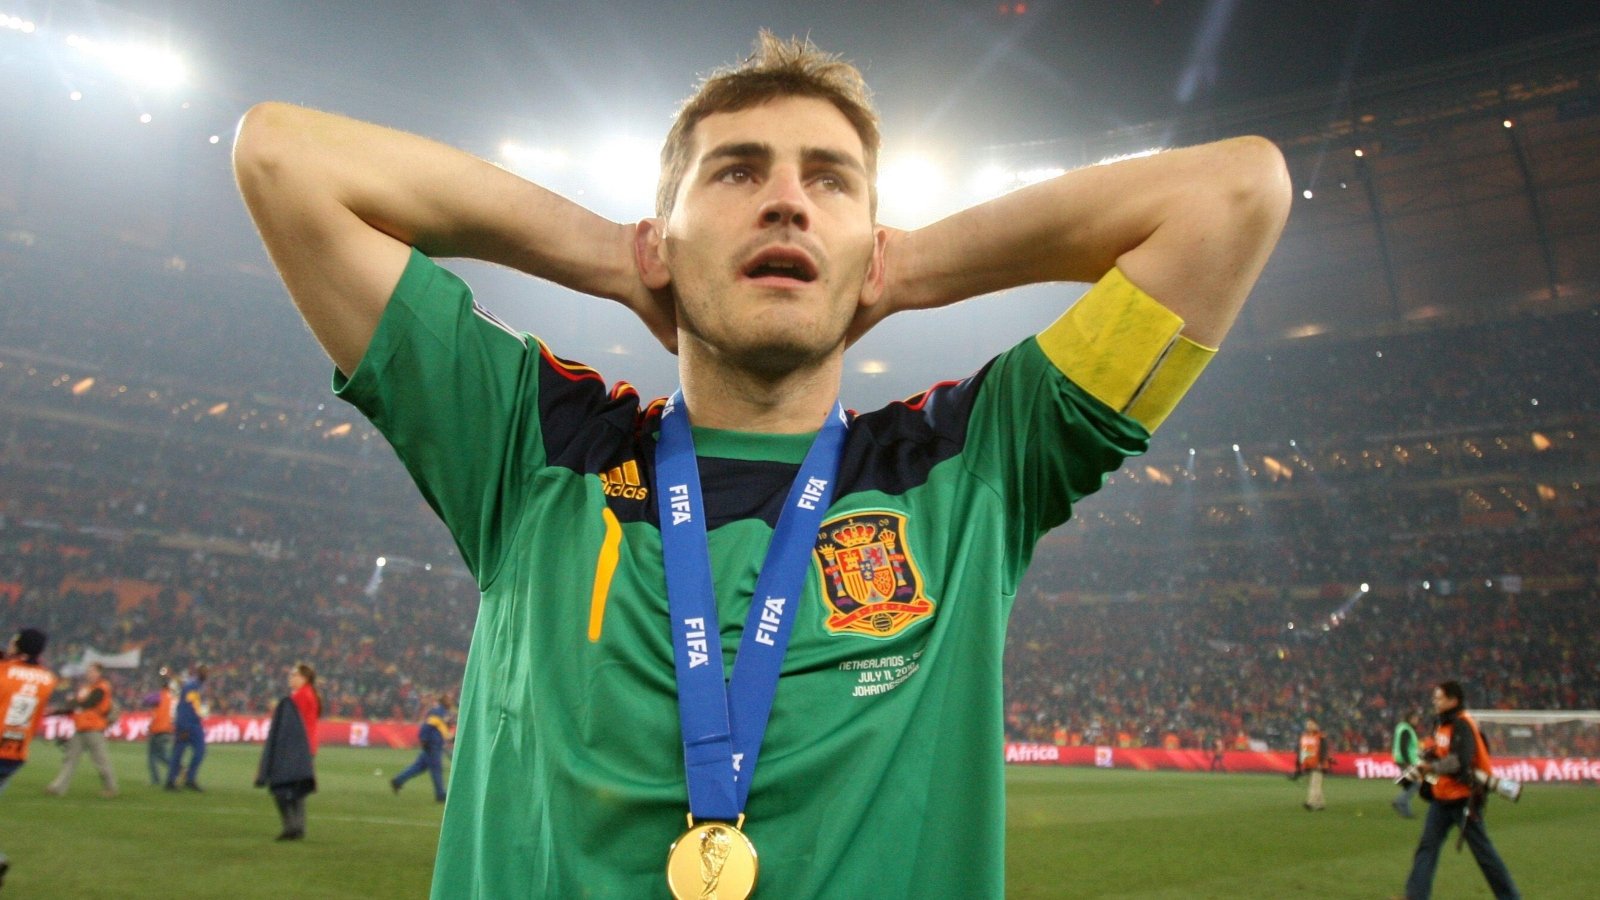 Iker Casillas hopes his on field excellence will translate to success in Web3